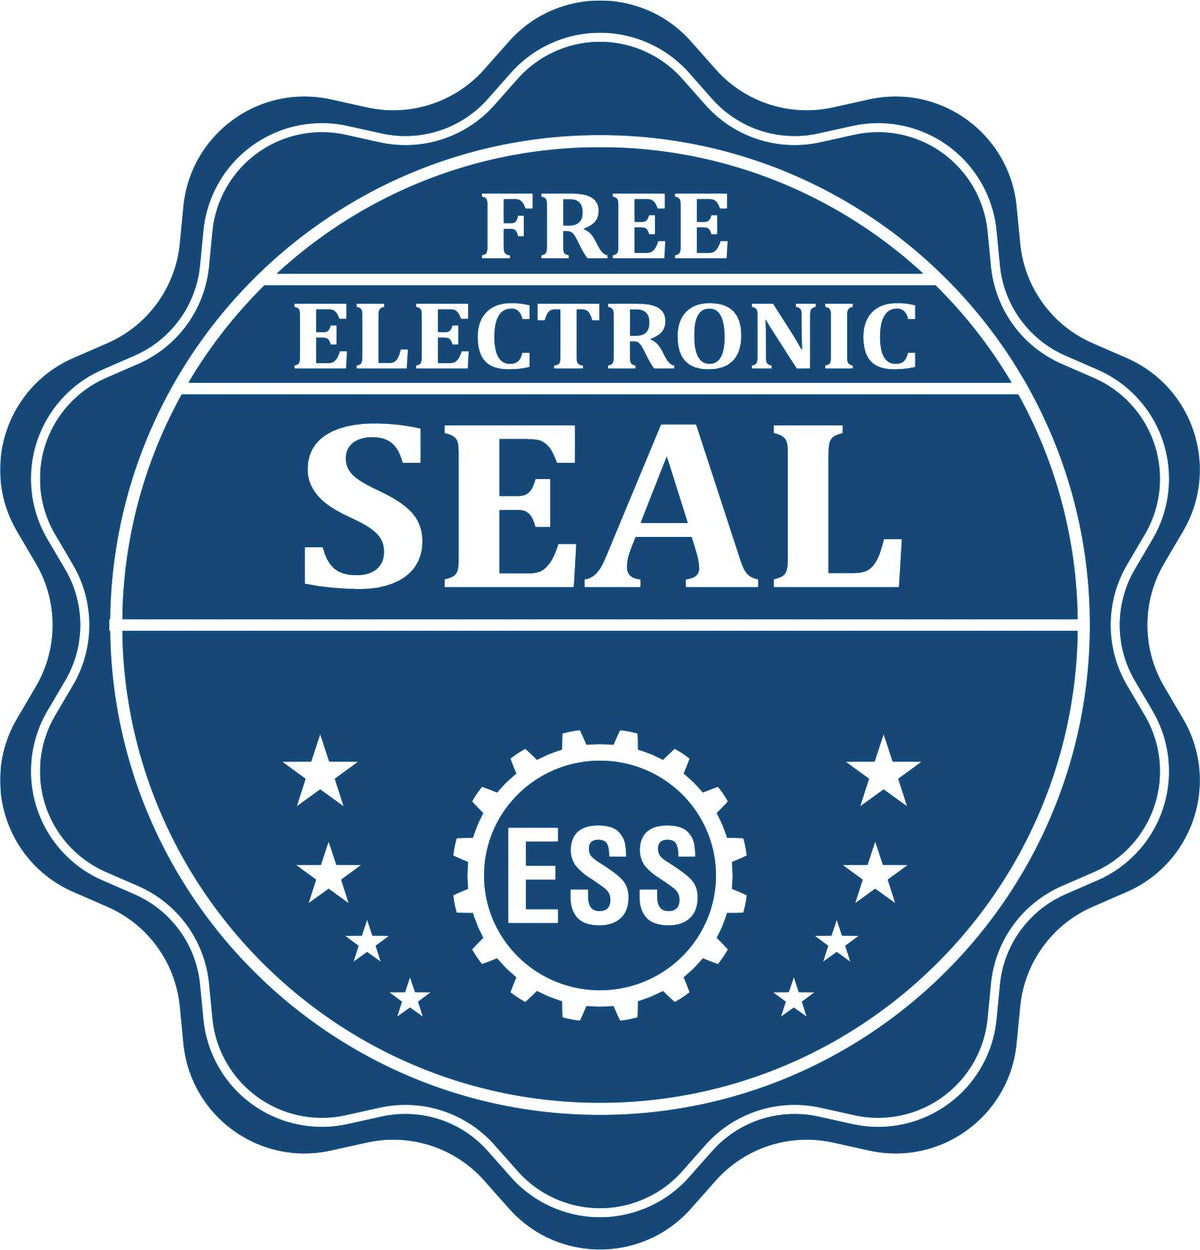 A badge showing a free electronic seal for the State of Rhode Island Architectural Seal Embosser with stars and the ESS gear on the emblem.